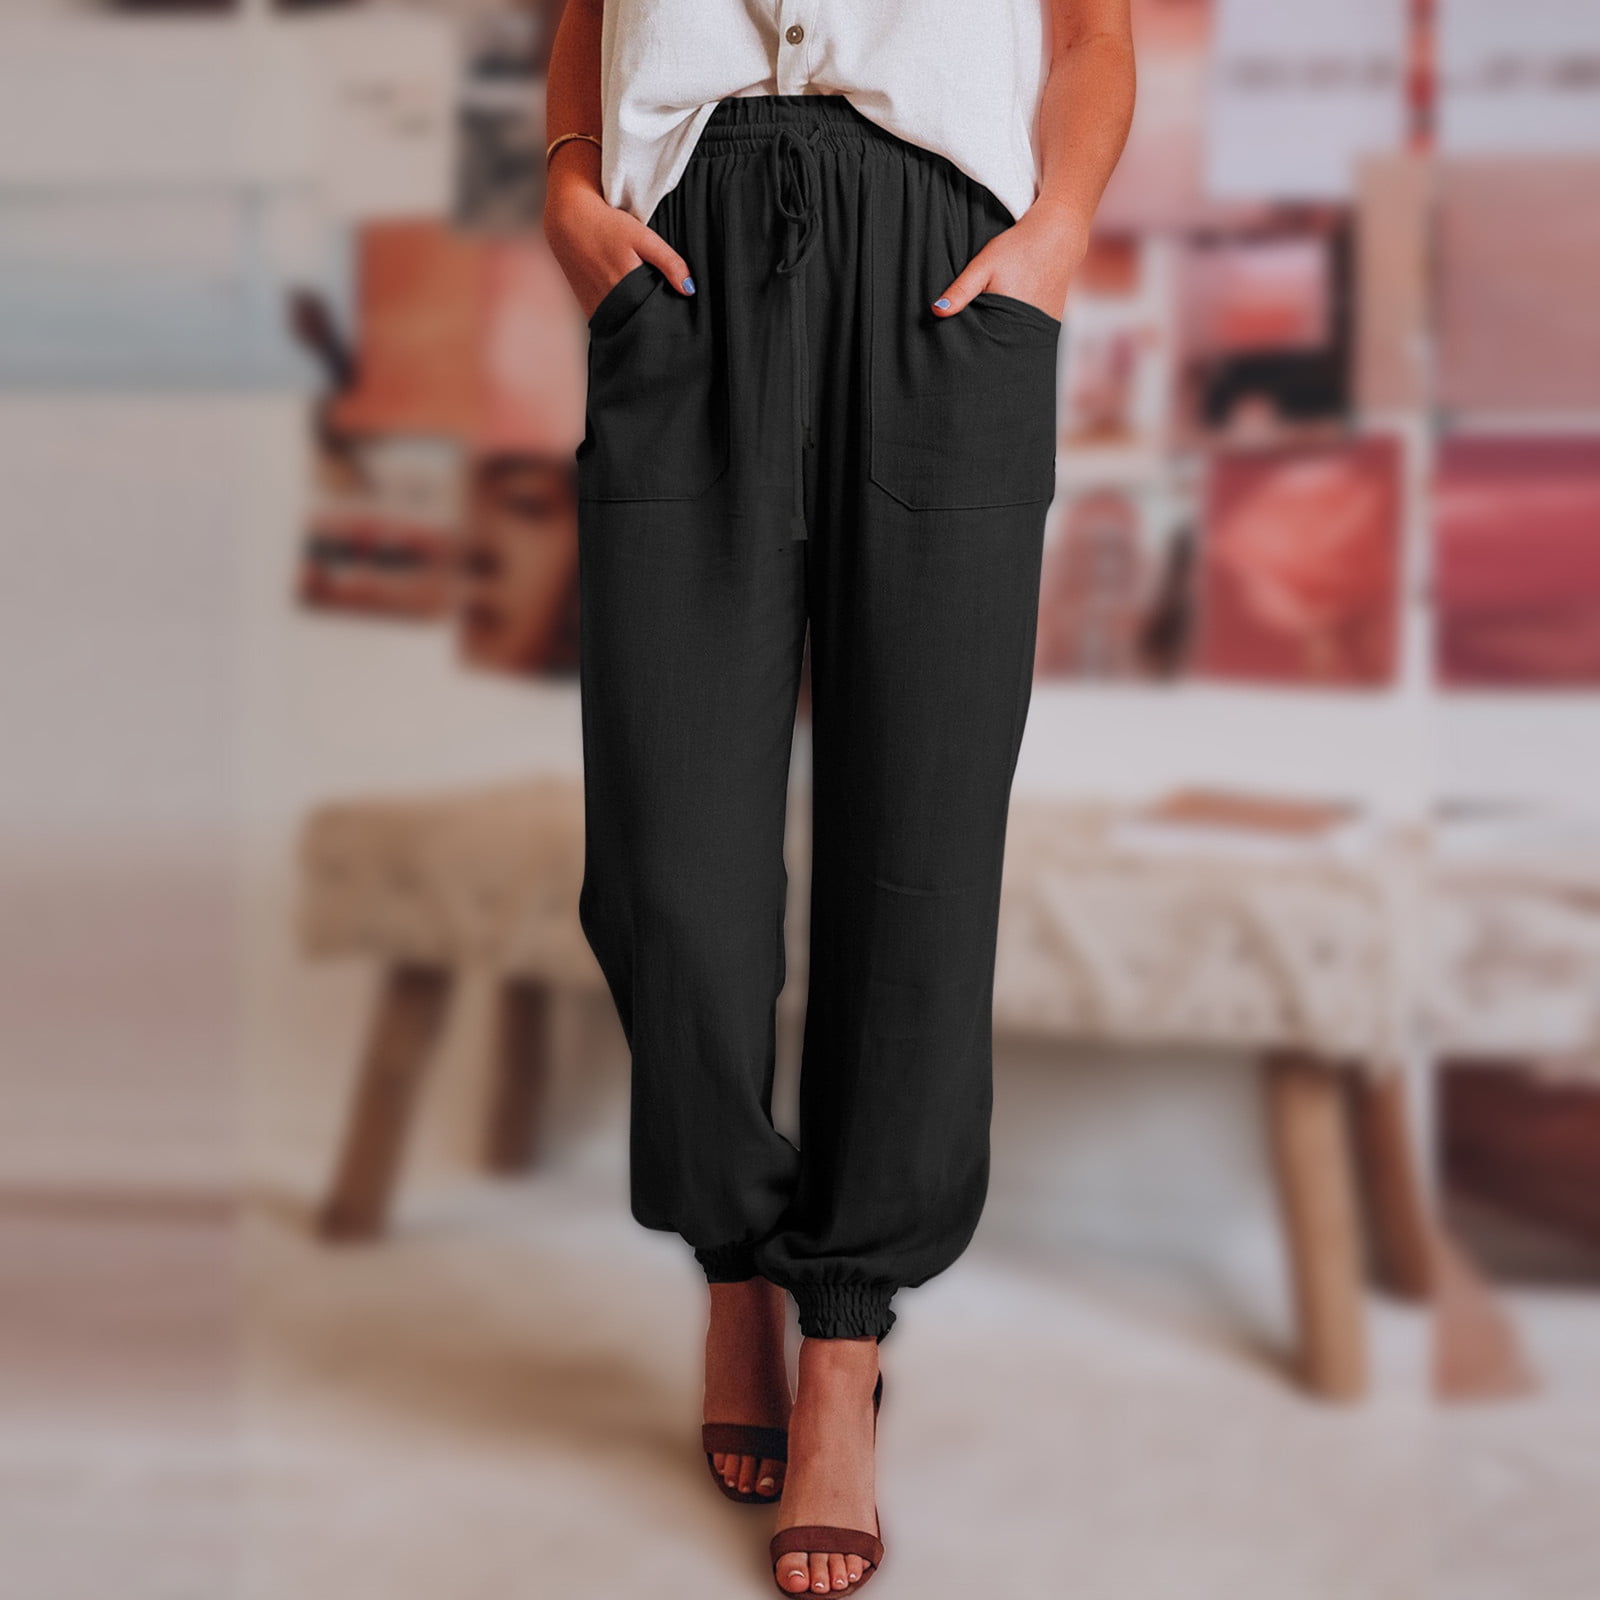 Comfortable pants for women so stylish youll wear them every day